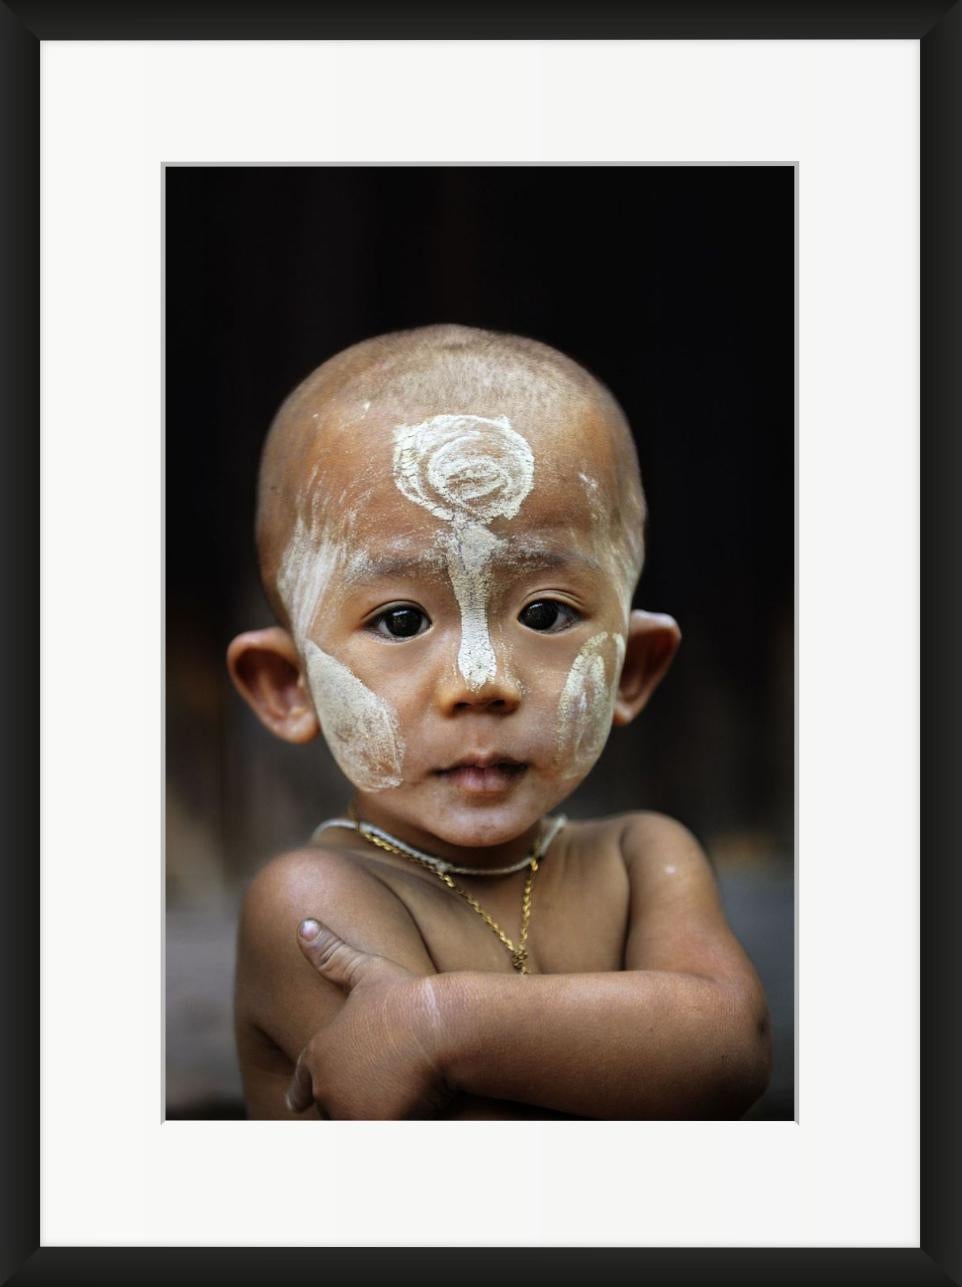 Child with Thanaka on Face - Photograph by Steve McCurry